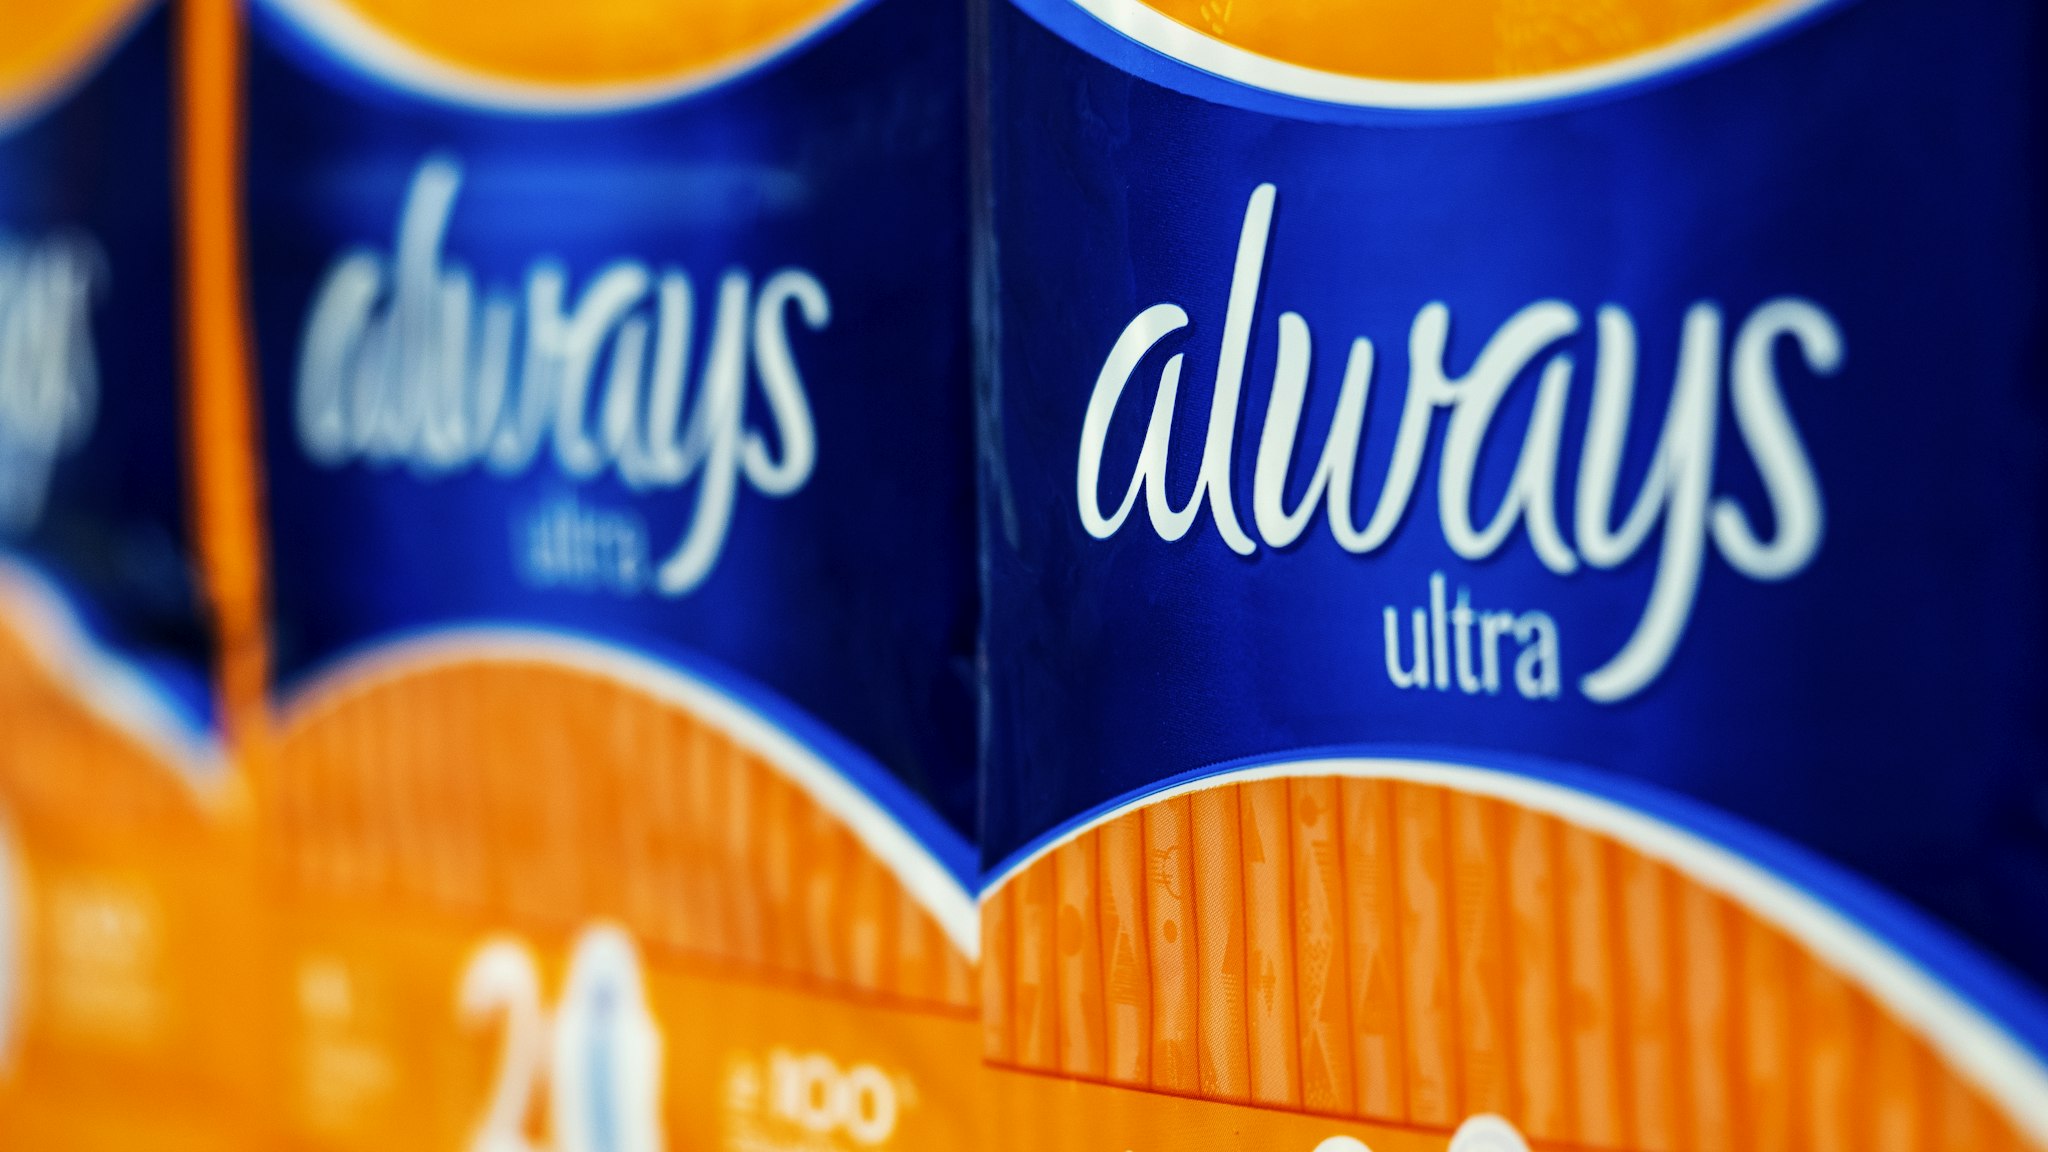 lways Ultra Pads seen in store. Always is a brand of feminine hygiene products, including maxi pads, ultra thin pads, pantiliner, and feminine wipes, produced by Procter & Gamble. (Photo by Igor Golovniov/SOPA Images/LightRocket via Getty Images)